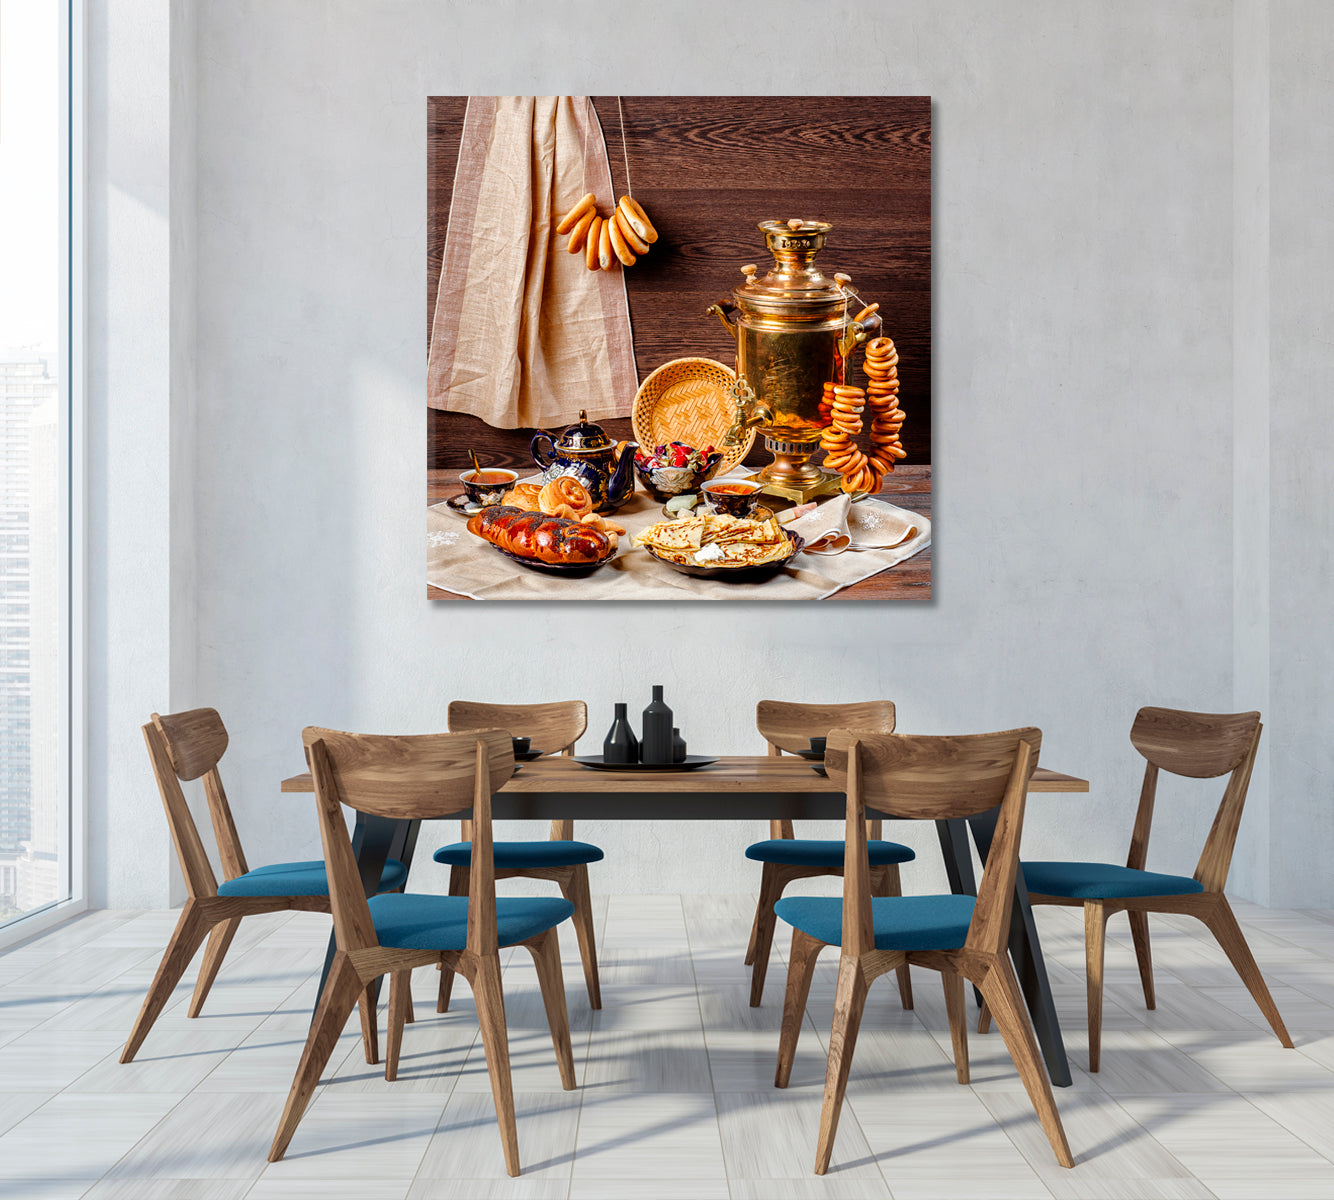 Still Life on Table Samovar with Bagels and Pancakes Canvas Print-Canvas Print-CetArt-1 panel-12x12 inches-CetArt